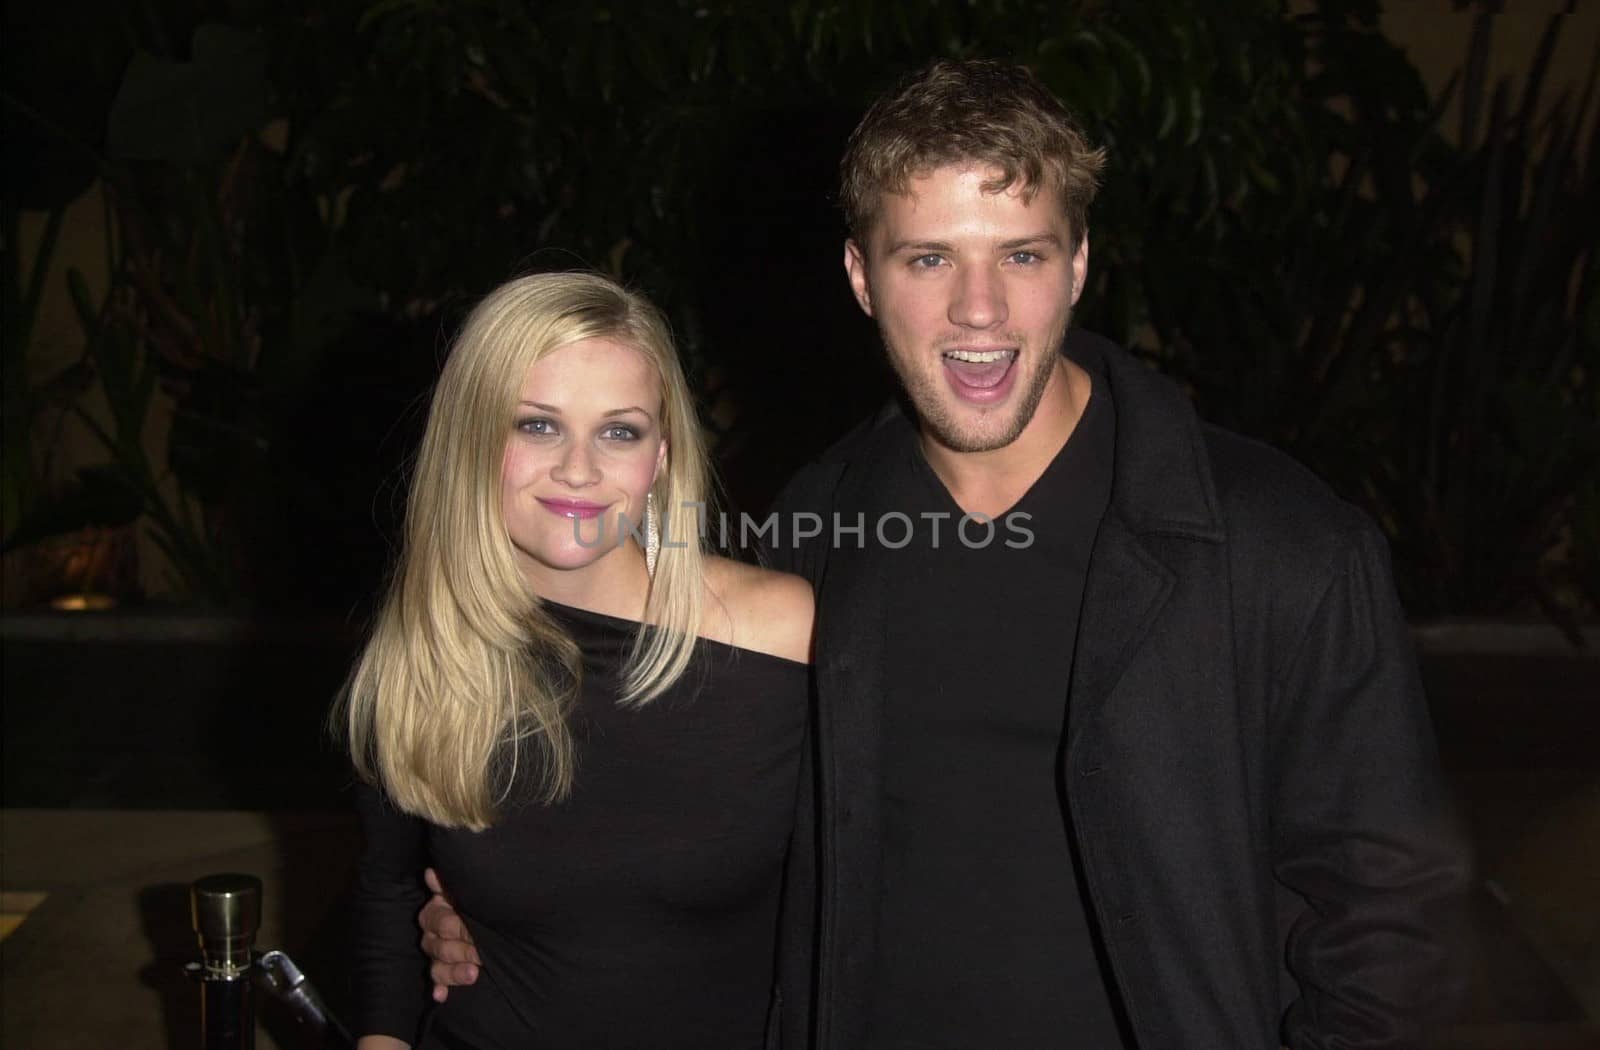 Reese Witherspoon and Ryan Phillippe at the premiere of The Way Of The Gun in Hollywood. 08-29-00